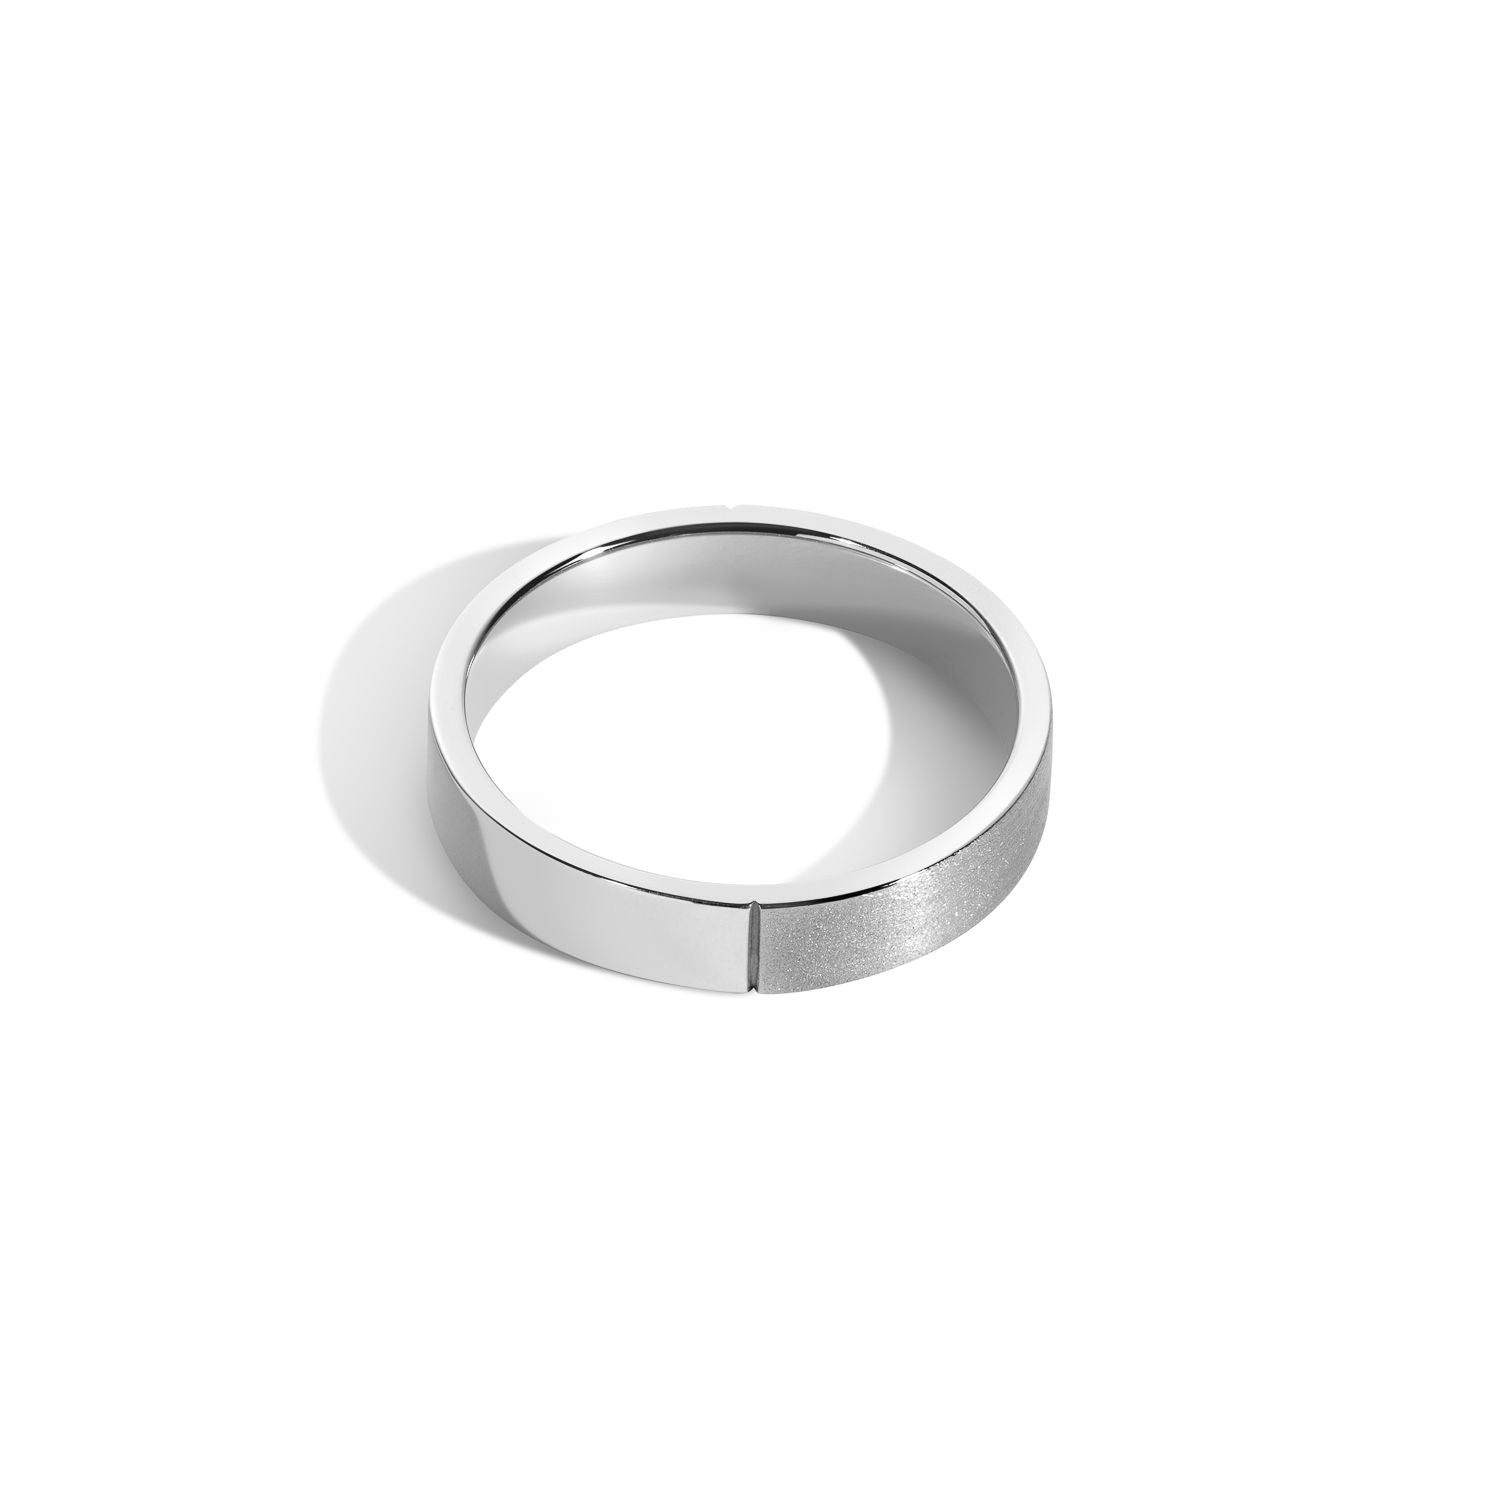 Shahla Karimi Jewelry Every Love 4mm Better Half Band - 14K White Gold or Platinum